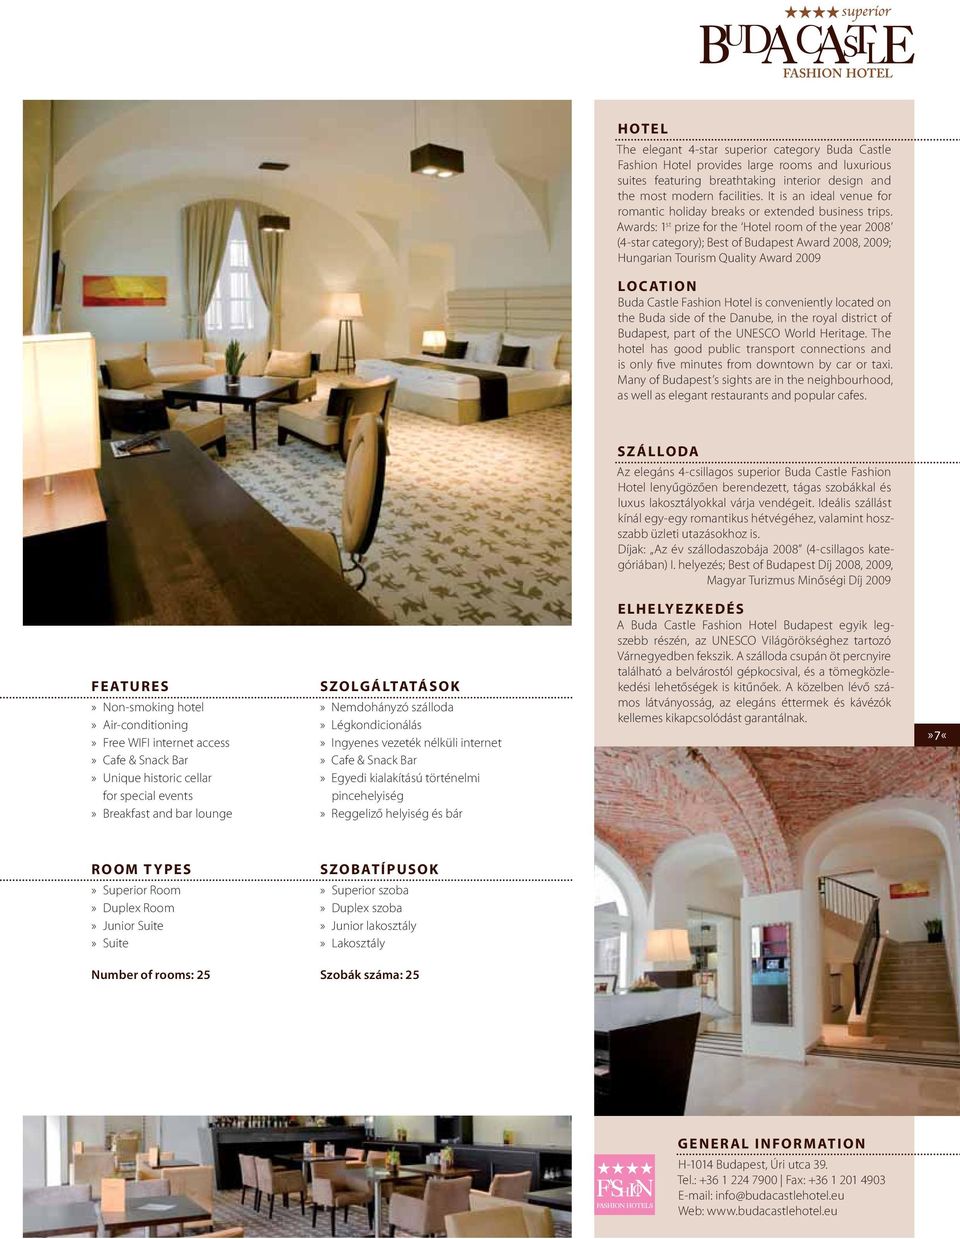 Awards: 1 st prize for the Hotel room of the year 2008 (4-star category); Best of Budapest Award 2008, 2009; Hungarian Tourism Quality Award 2009 LOCATION Buda Castle Fashion Hotel is conveniently